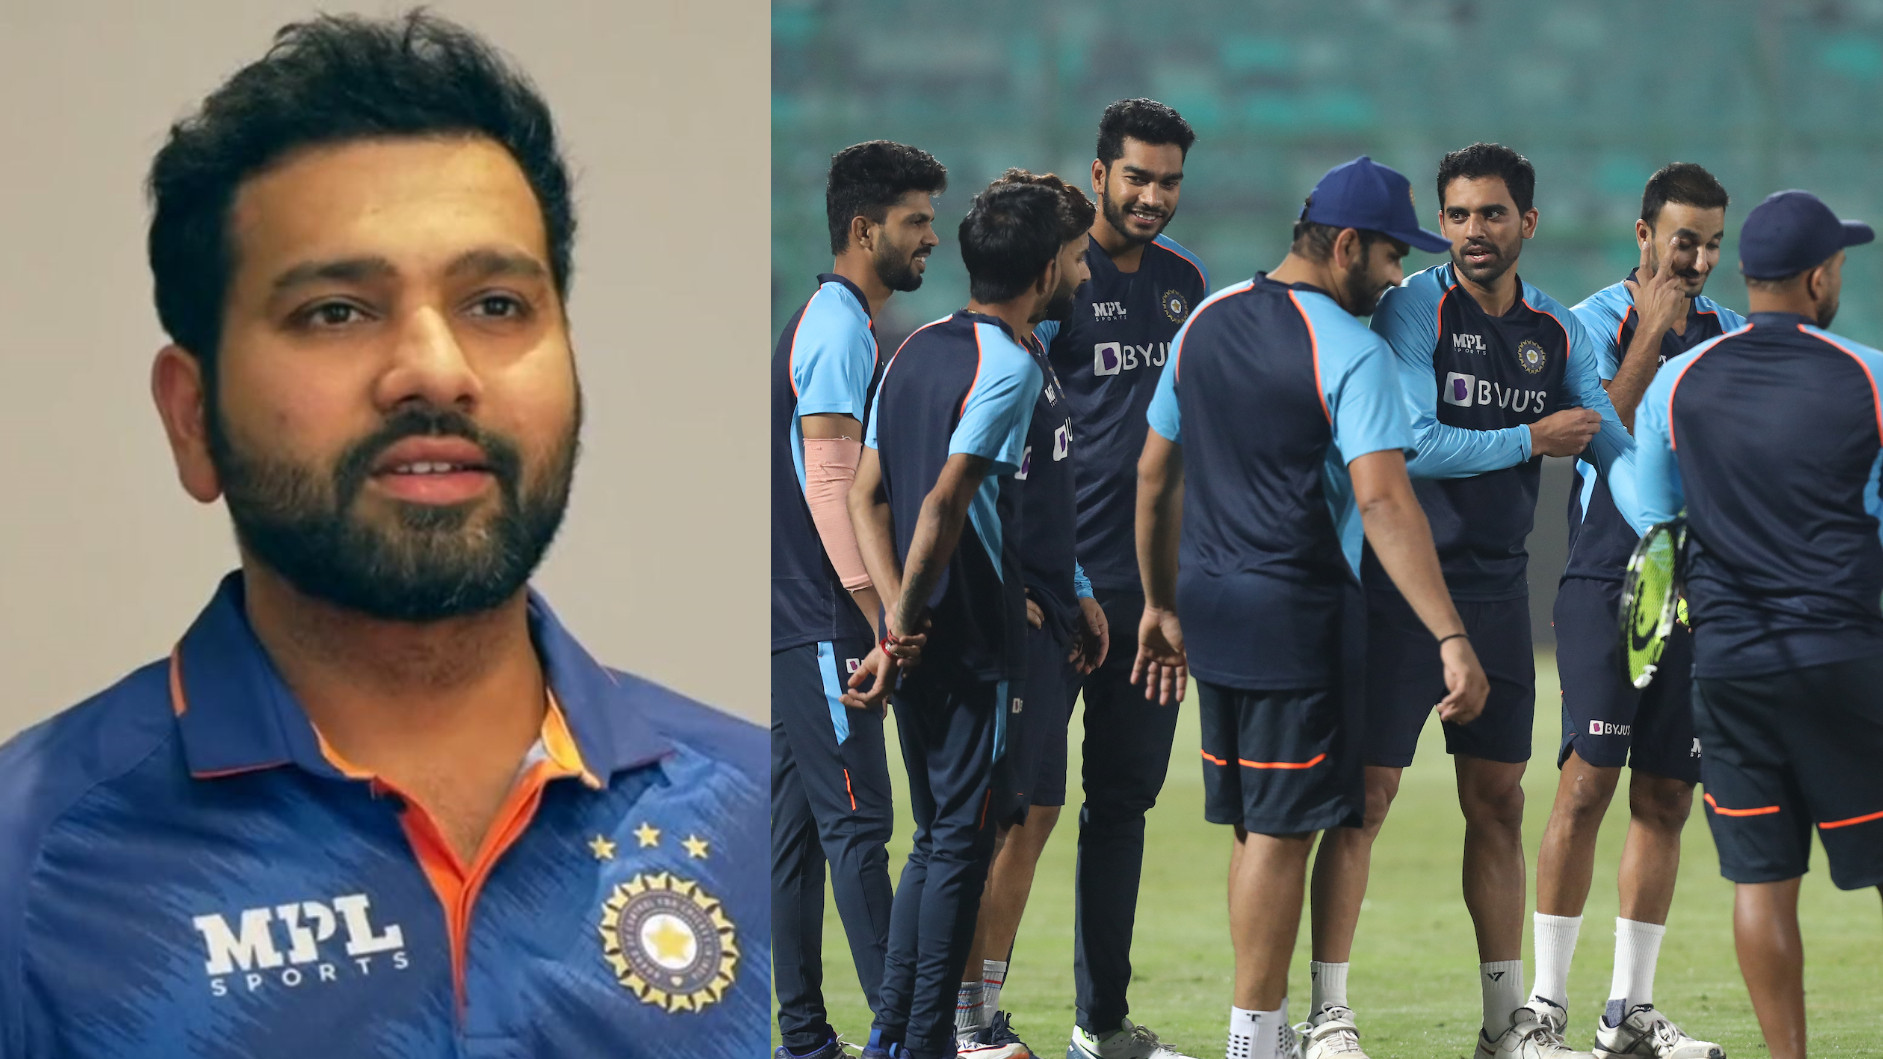 IND v NZ 2021: COC Predicted Team India playing XI for the 1st T20I v New Zealand